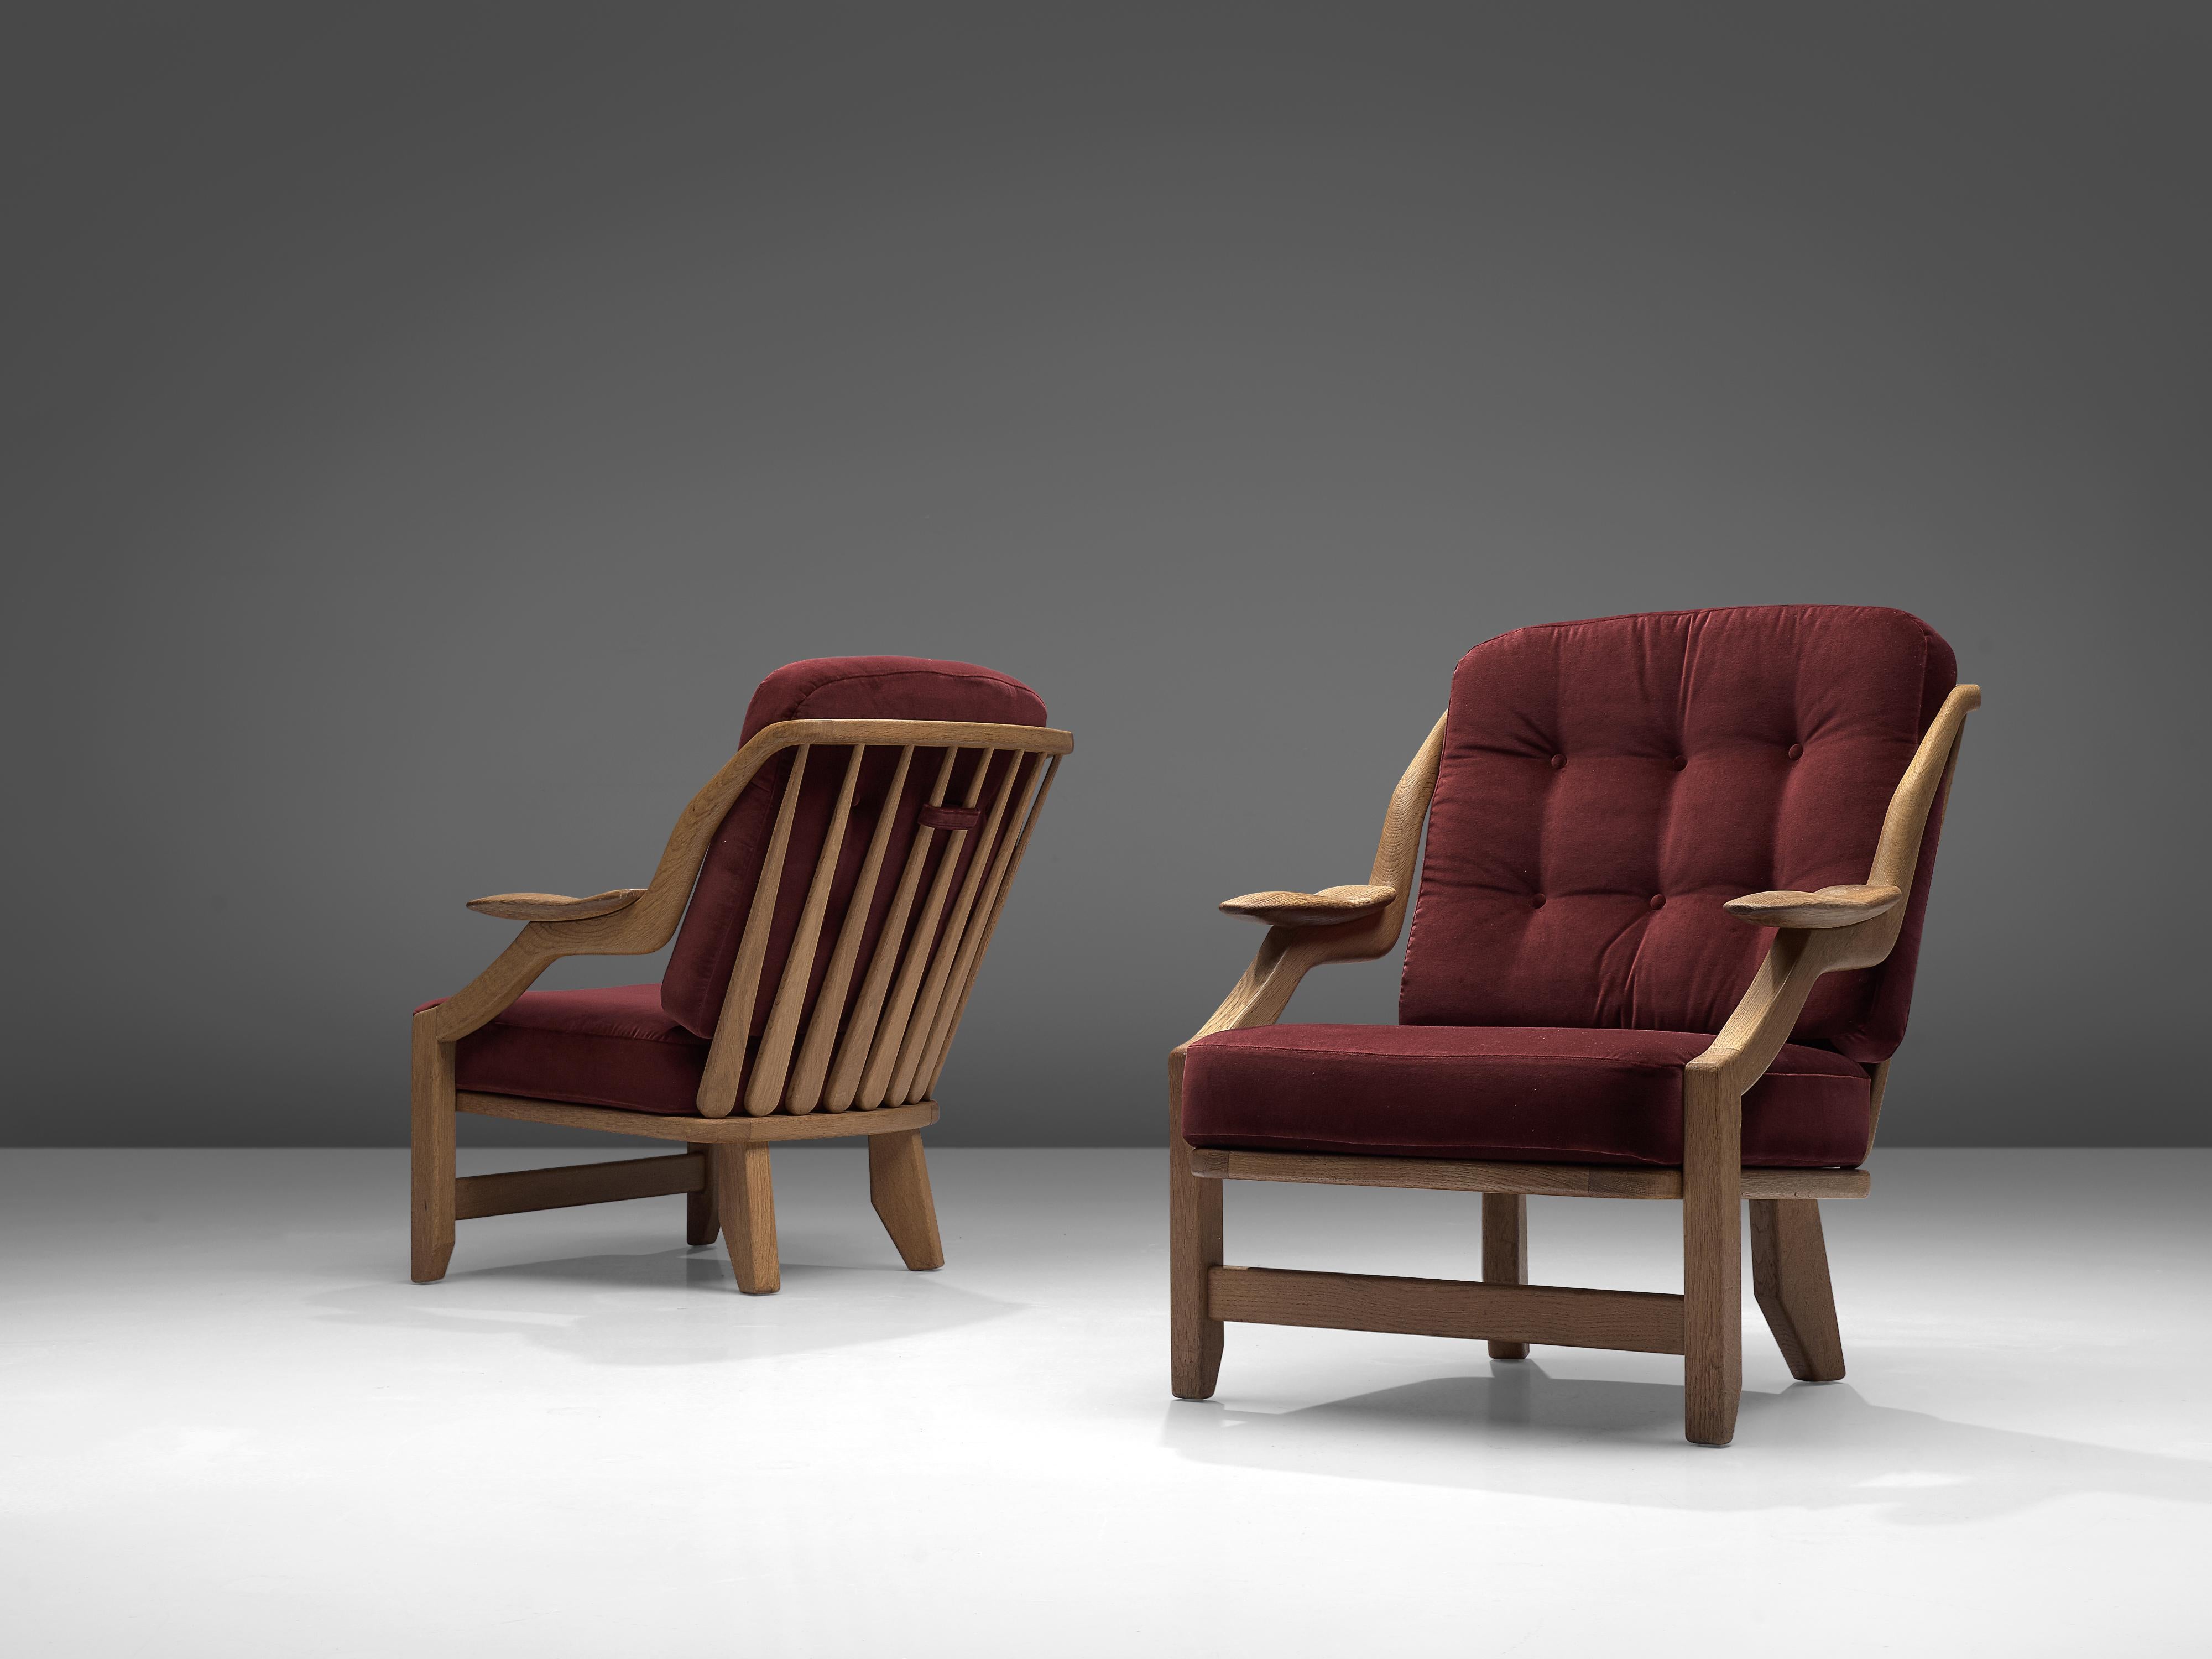 Guillerme et Chambron, pair of lounge chairs model 'Gregoire', burgundy fabric, oak, France, 1950s

This French designer duo is known for their extreme high quality solid oak furniture, from which this set is another great example. These chairs have